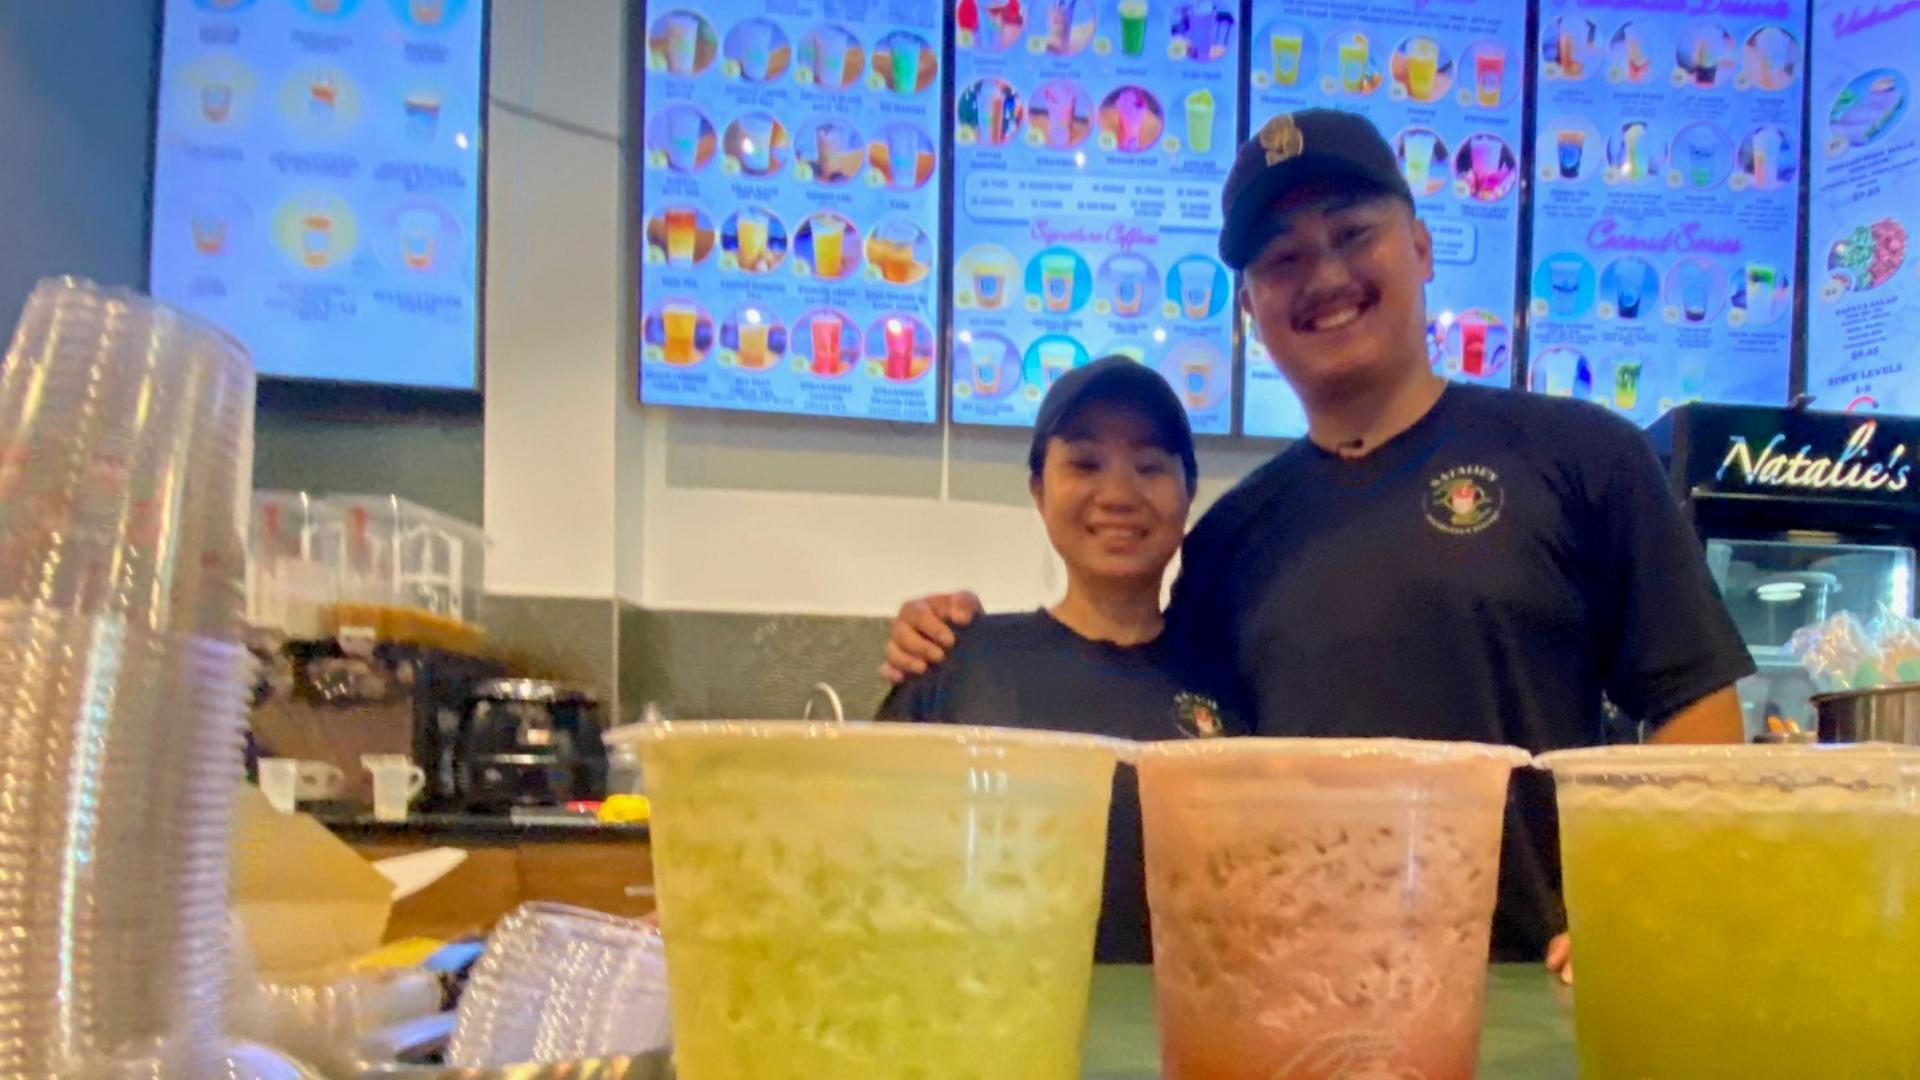 Check out more than 20 boba tea spots in Seattle's Southside with this tool. #k5evening